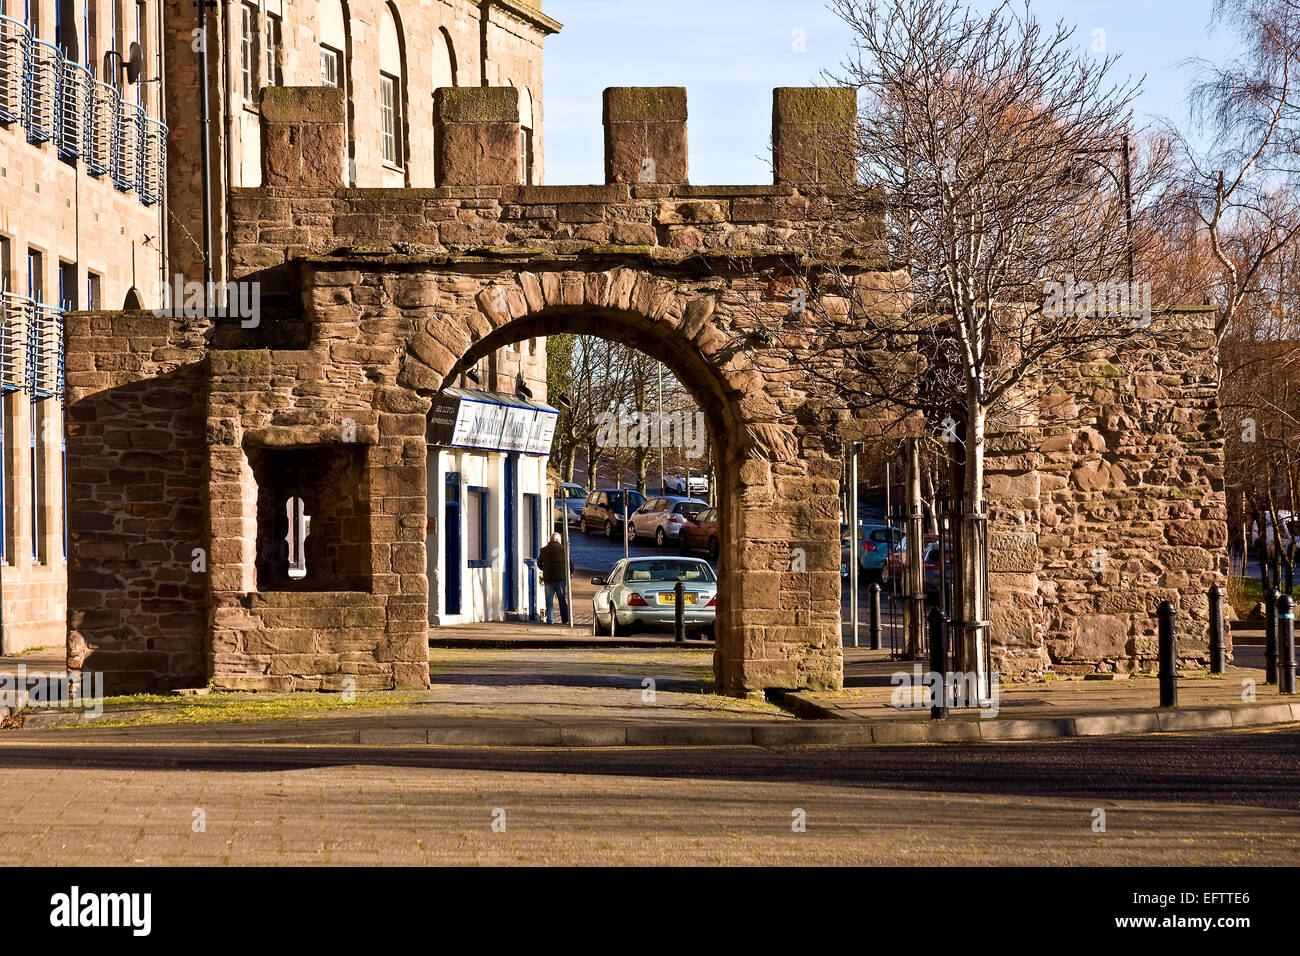 The George Wishart Arch is the last surviving remnant of the old city walls in Dundee situated along the Cowgate, Scotland, UK Stock Photo